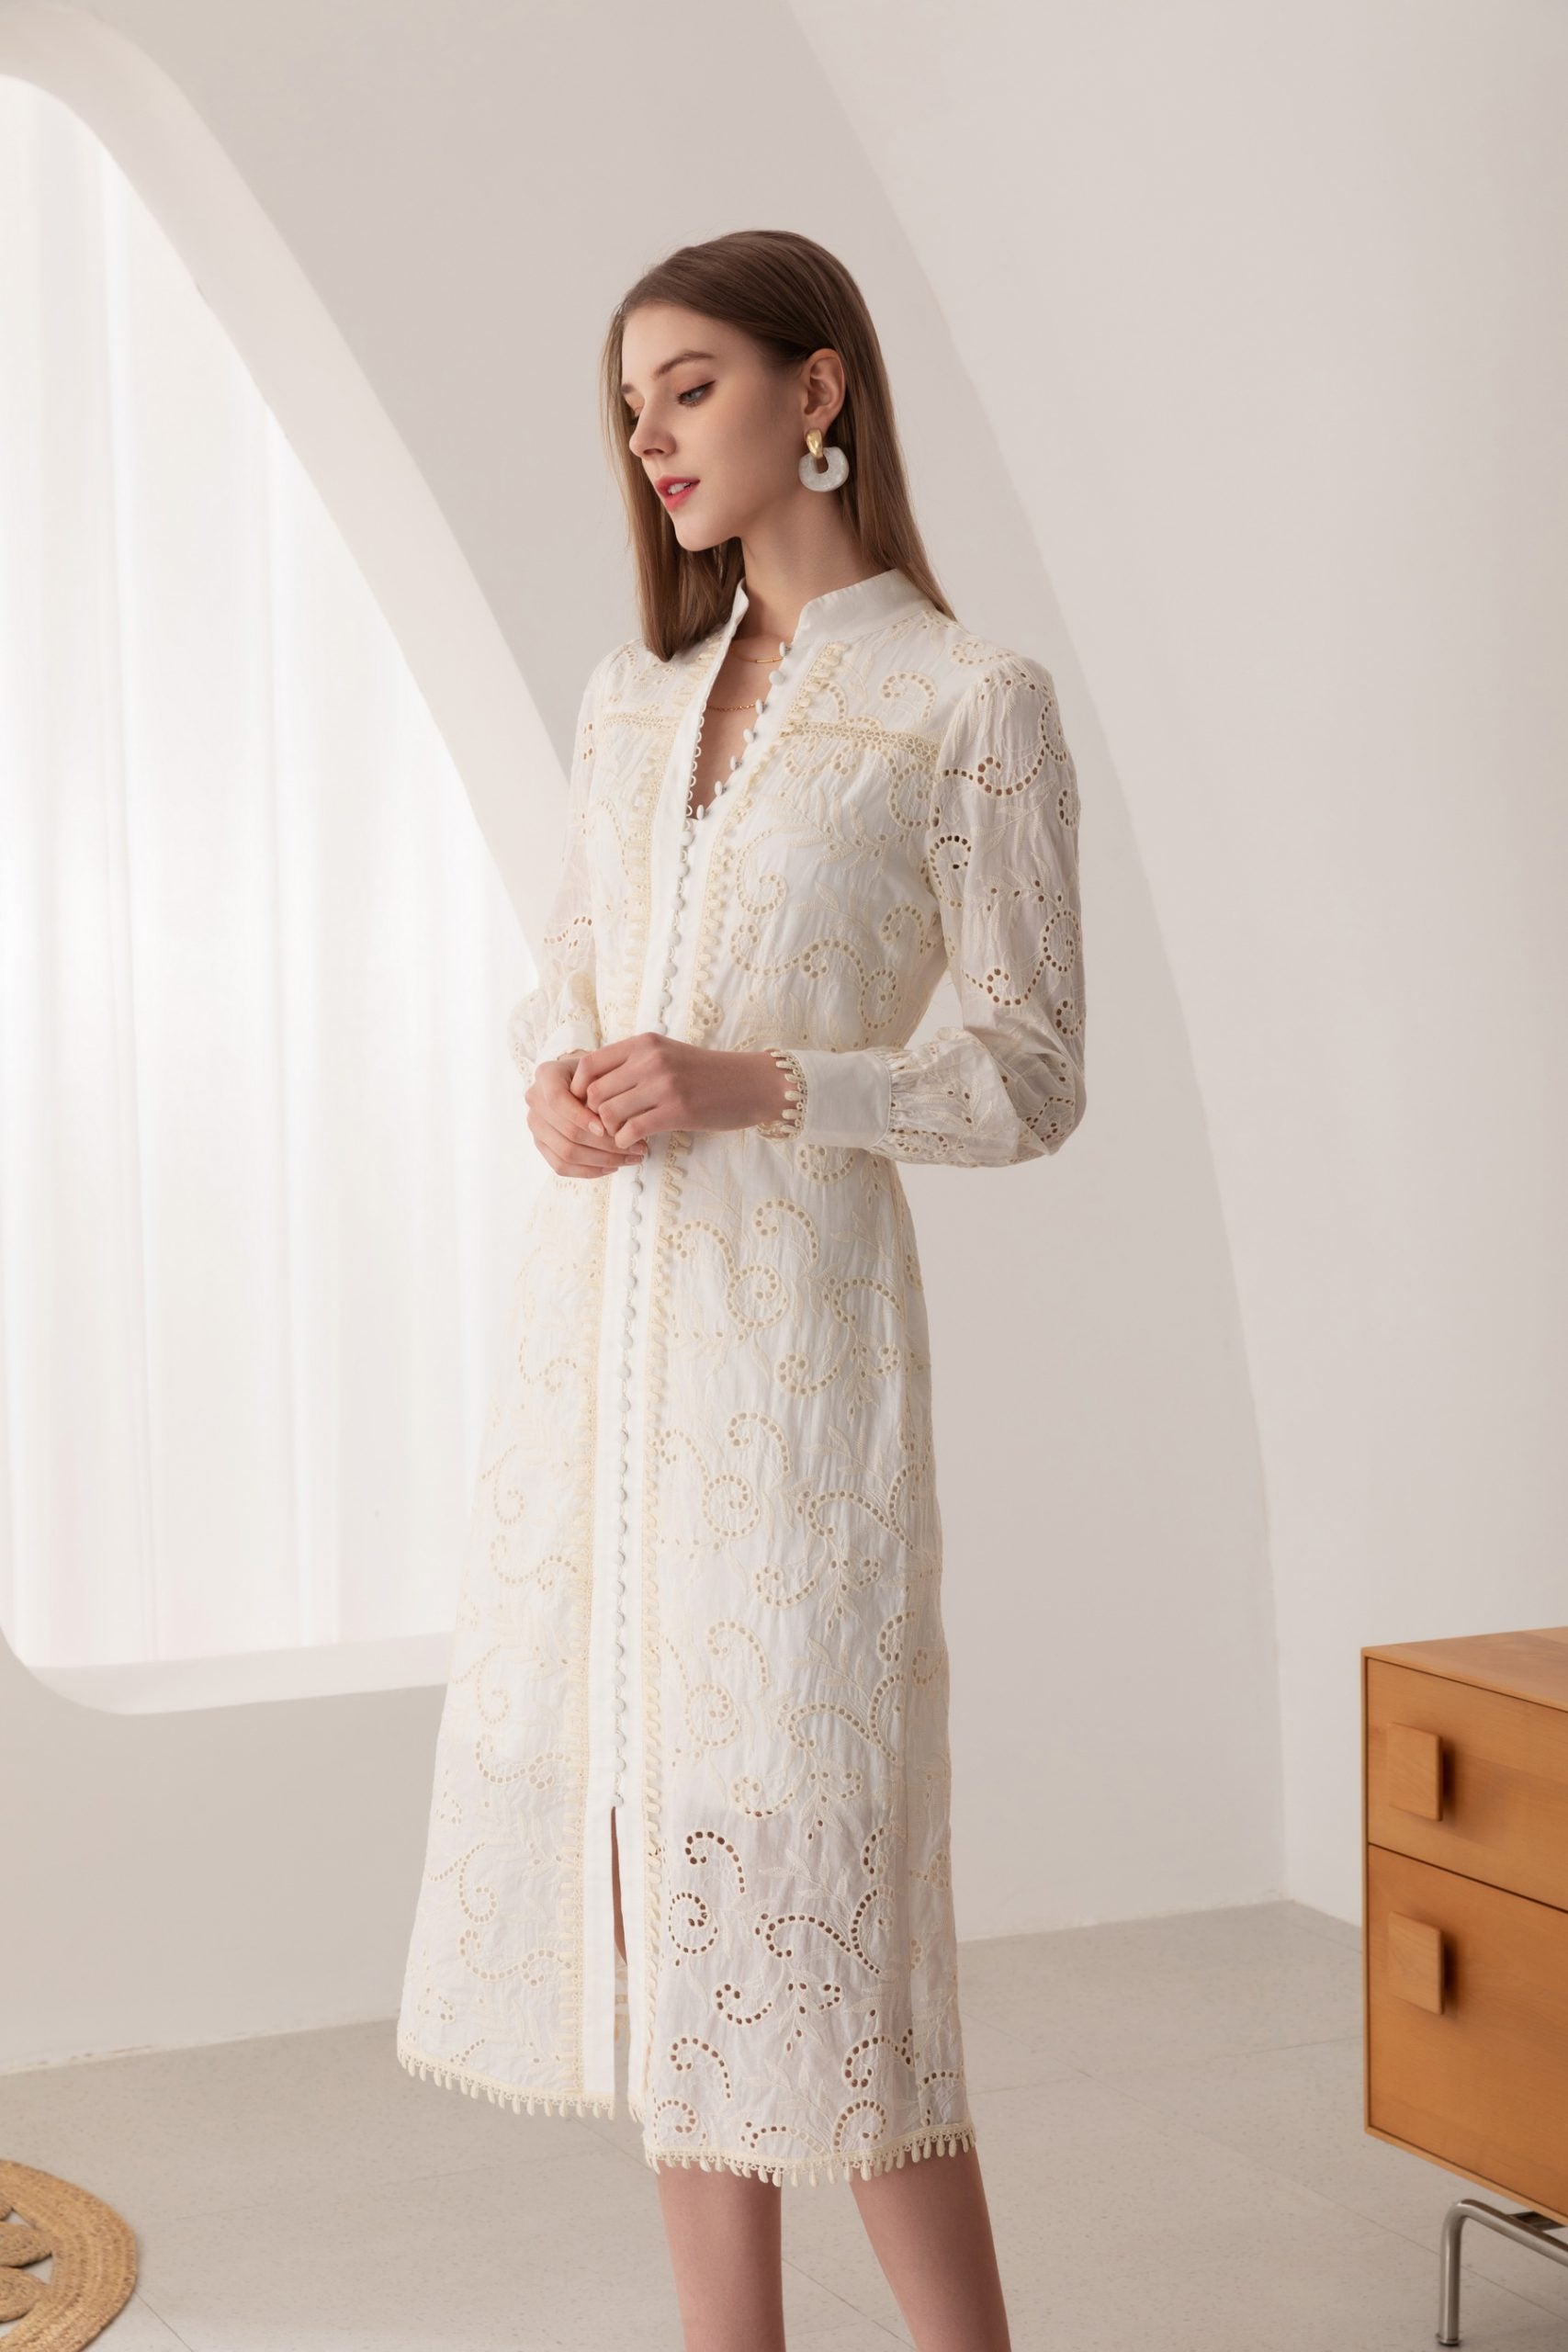 Discover timeless beauty in our Embroidered White Cotton Midi Dress. Embrace sophistication with every step.